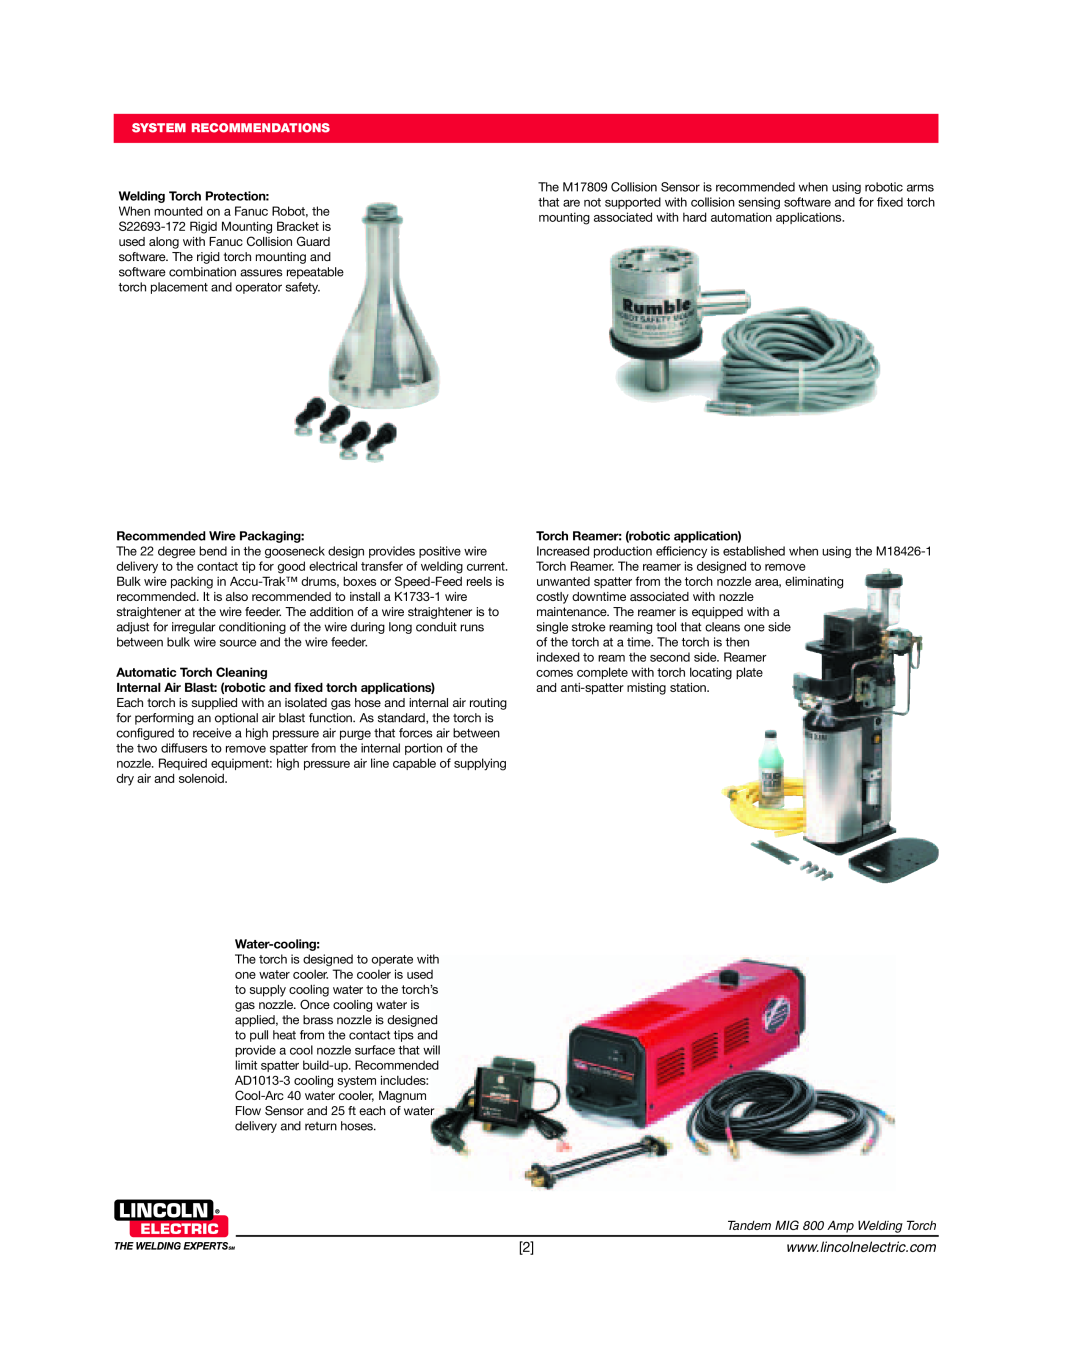 Lincoln Electric 900 manual System Recommendations, Welding Torch Protection, Recommended Wire Packaging, Water-cooling 